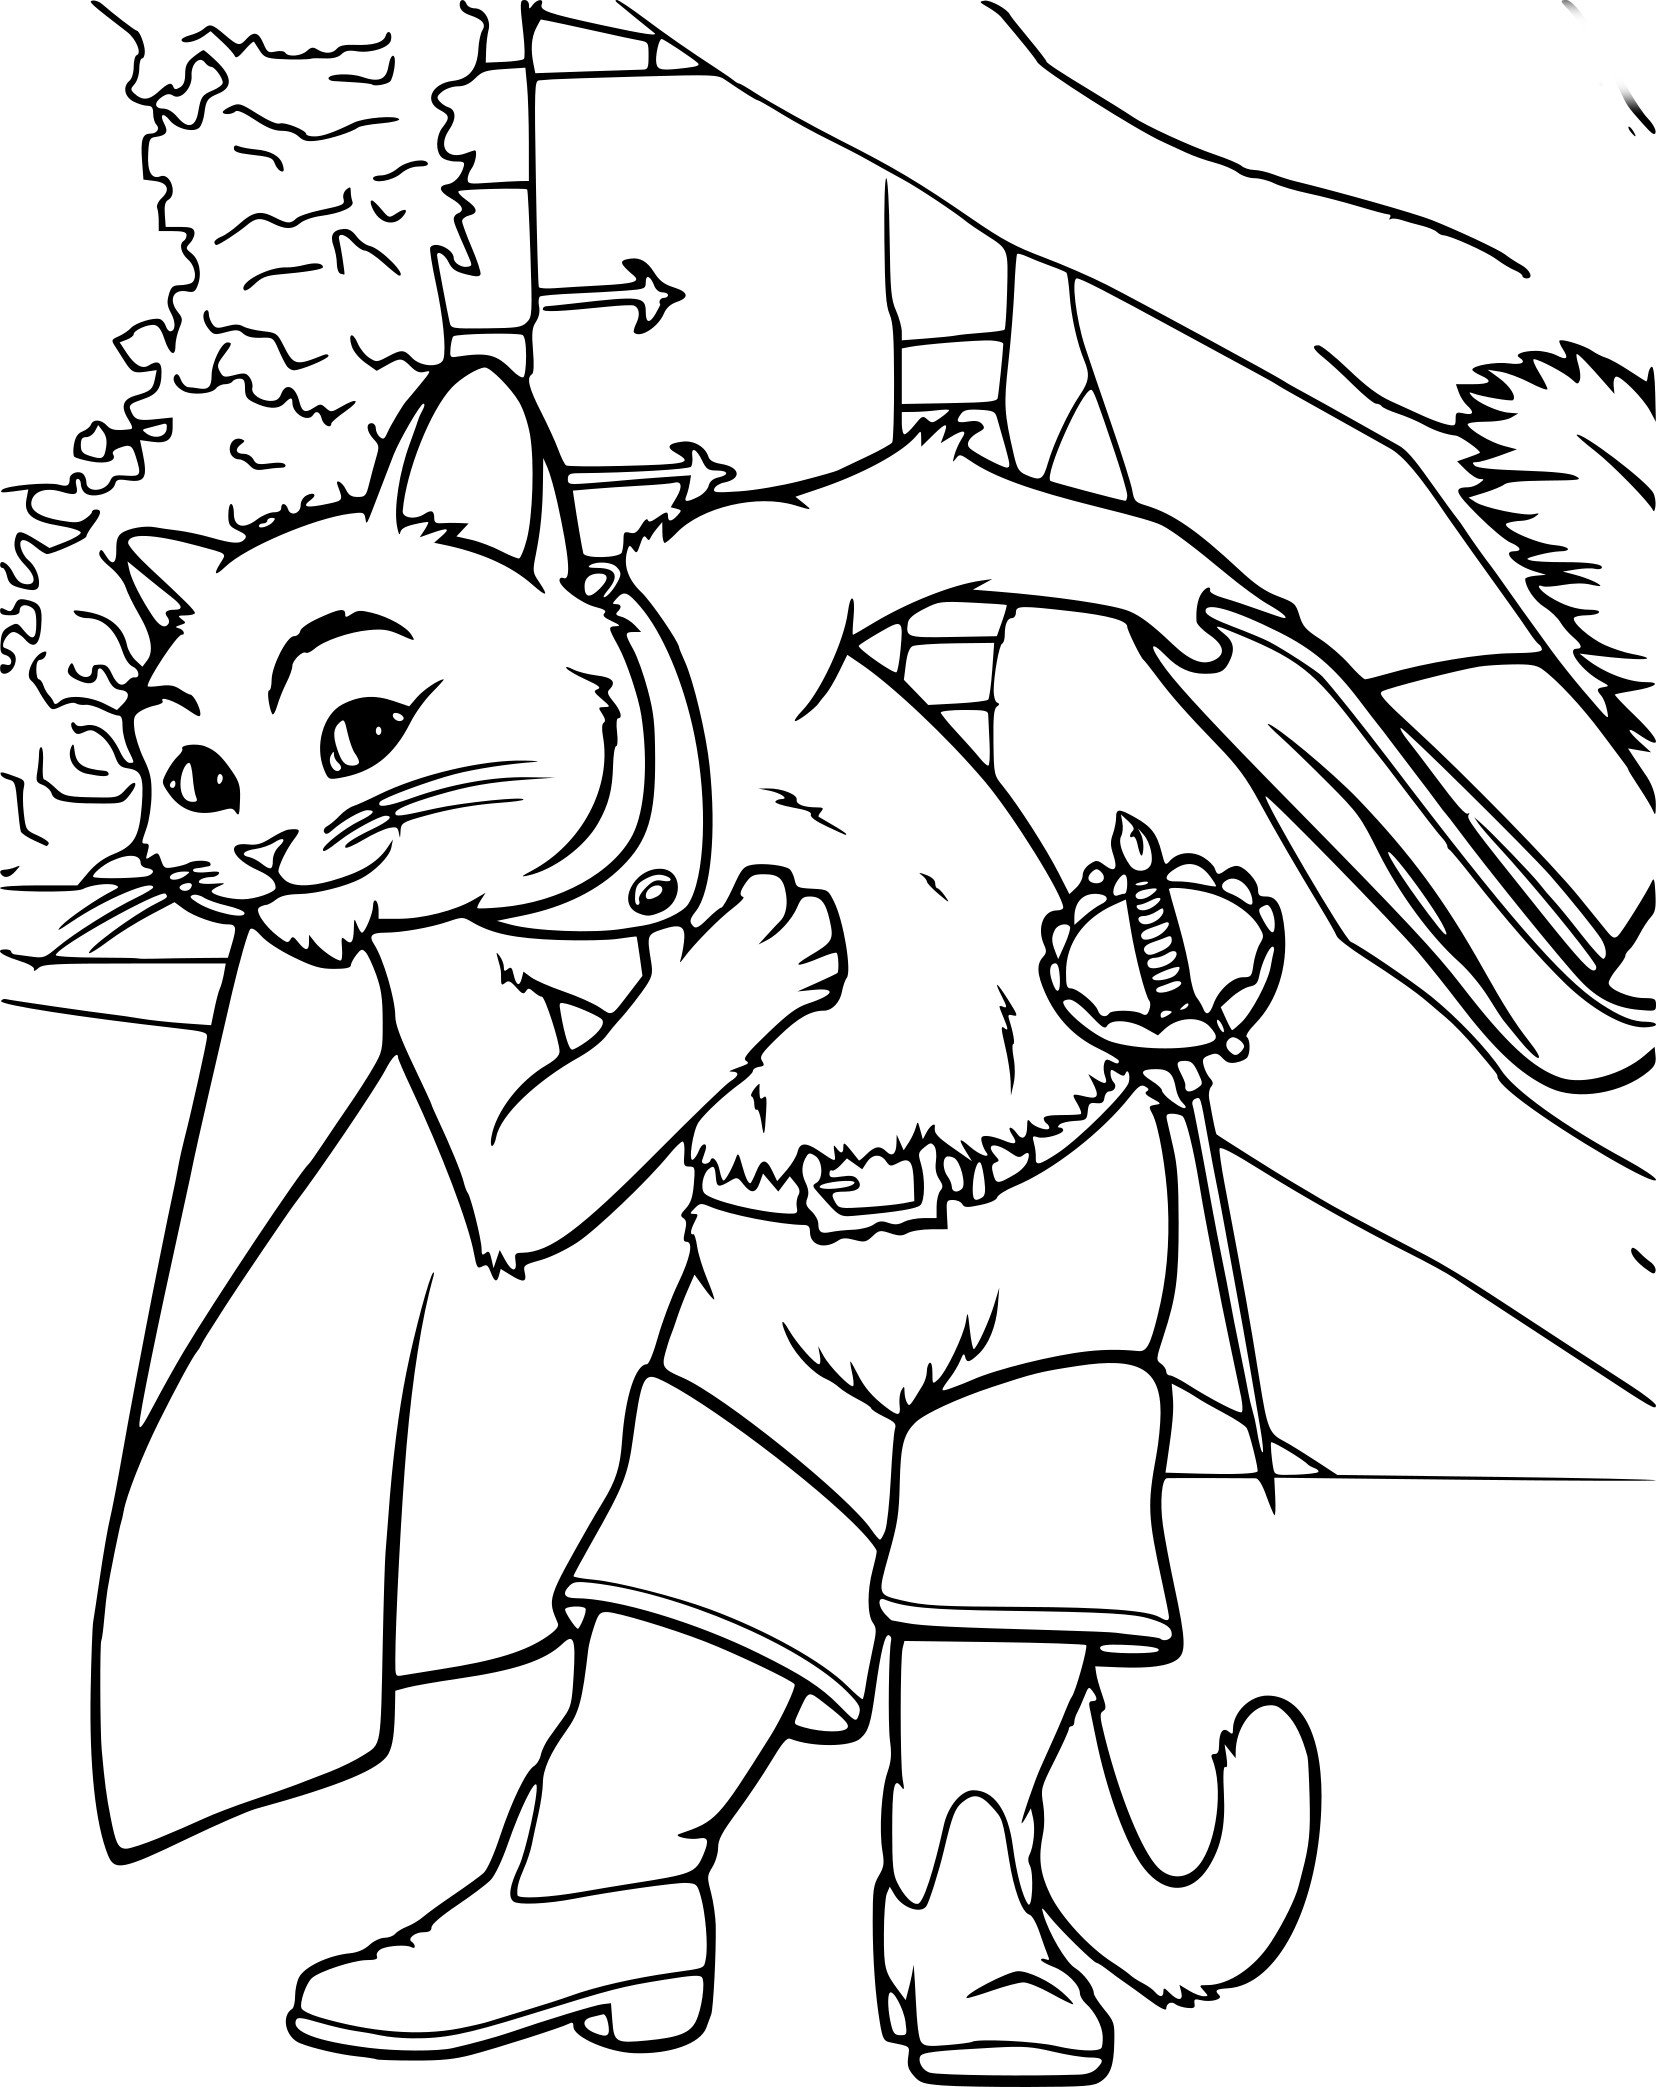 Coloring page: Puss in Boots (Animation Movies) #170615 - Free Printable Coloring Pages